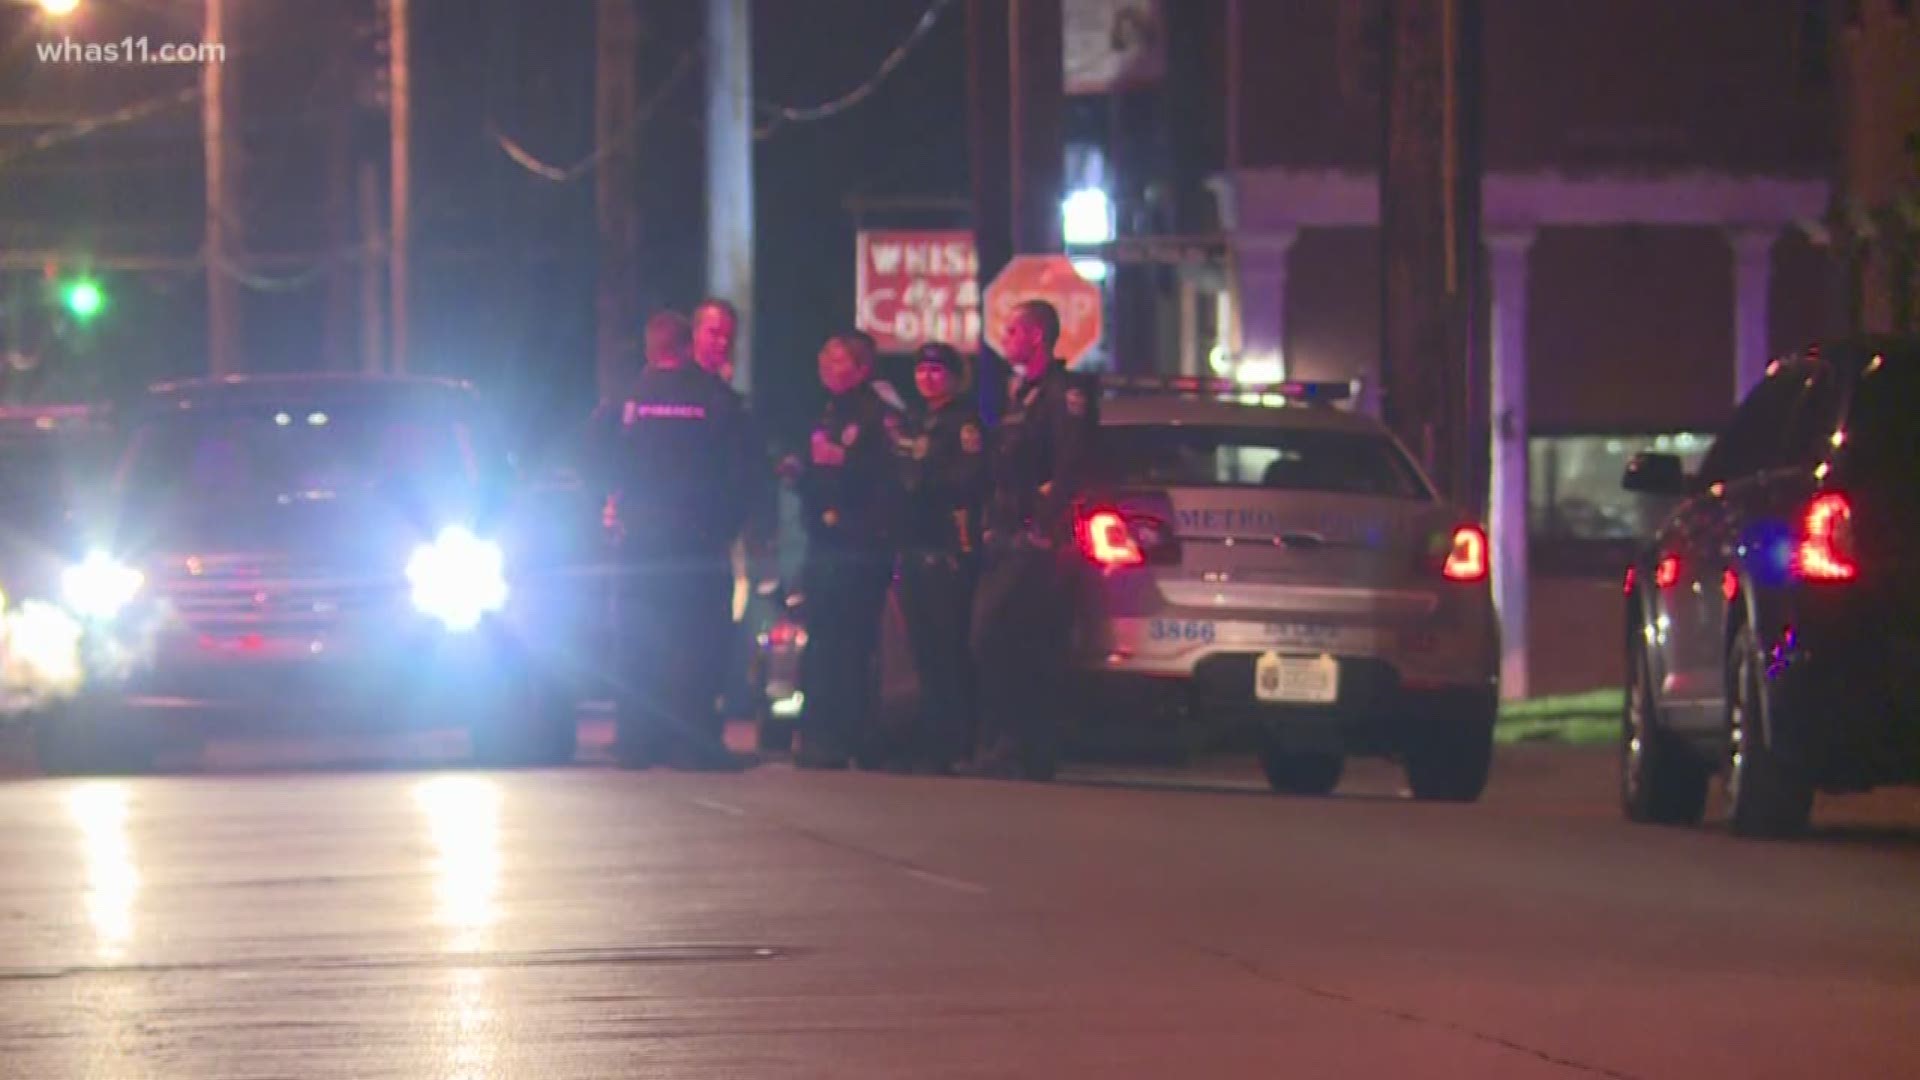 A man was shot multiple times on Lampton Street, according to LMPD.